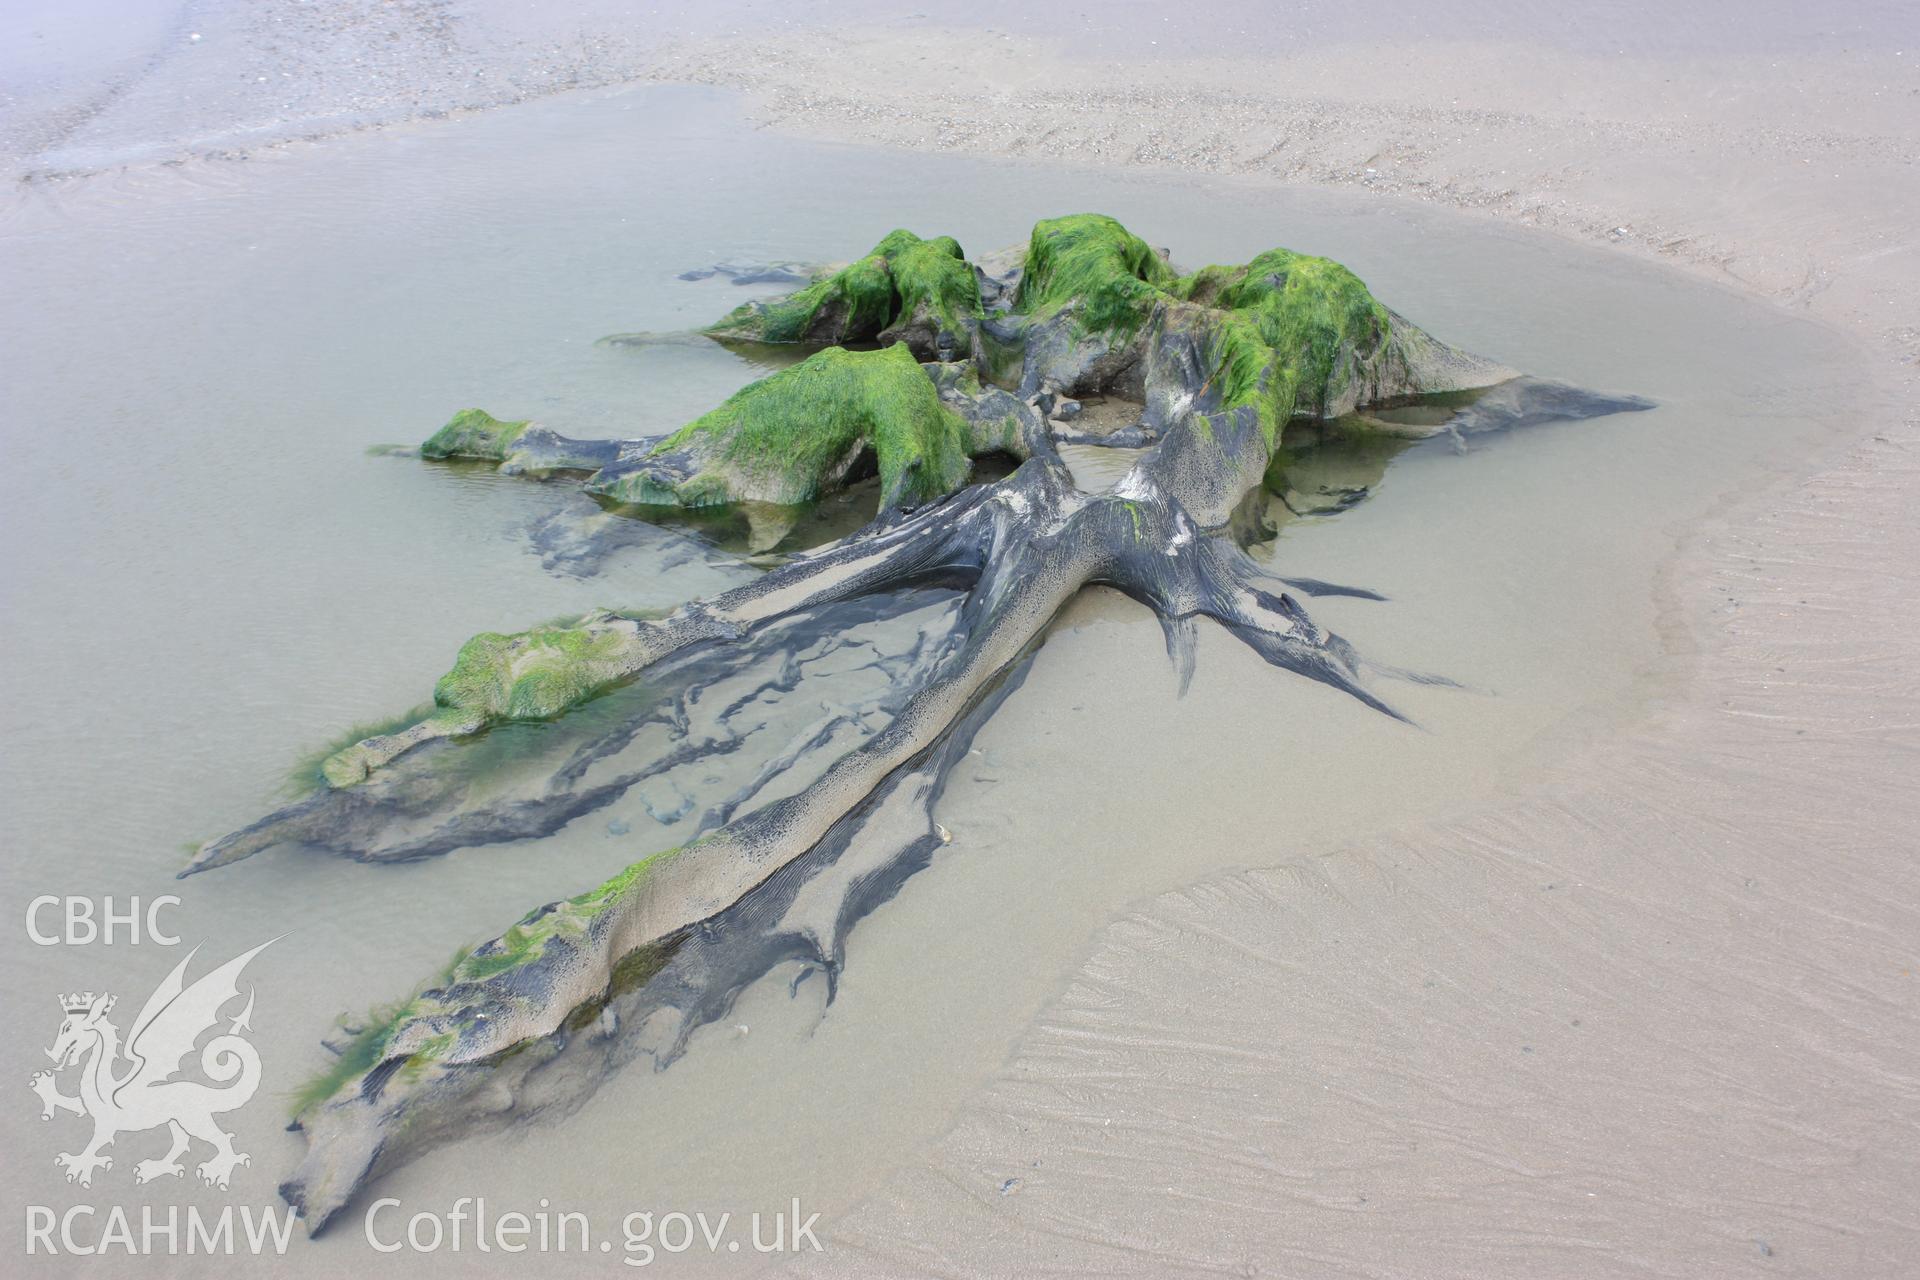 Example of tree root system exposed by lowering of beach responding to winter storms